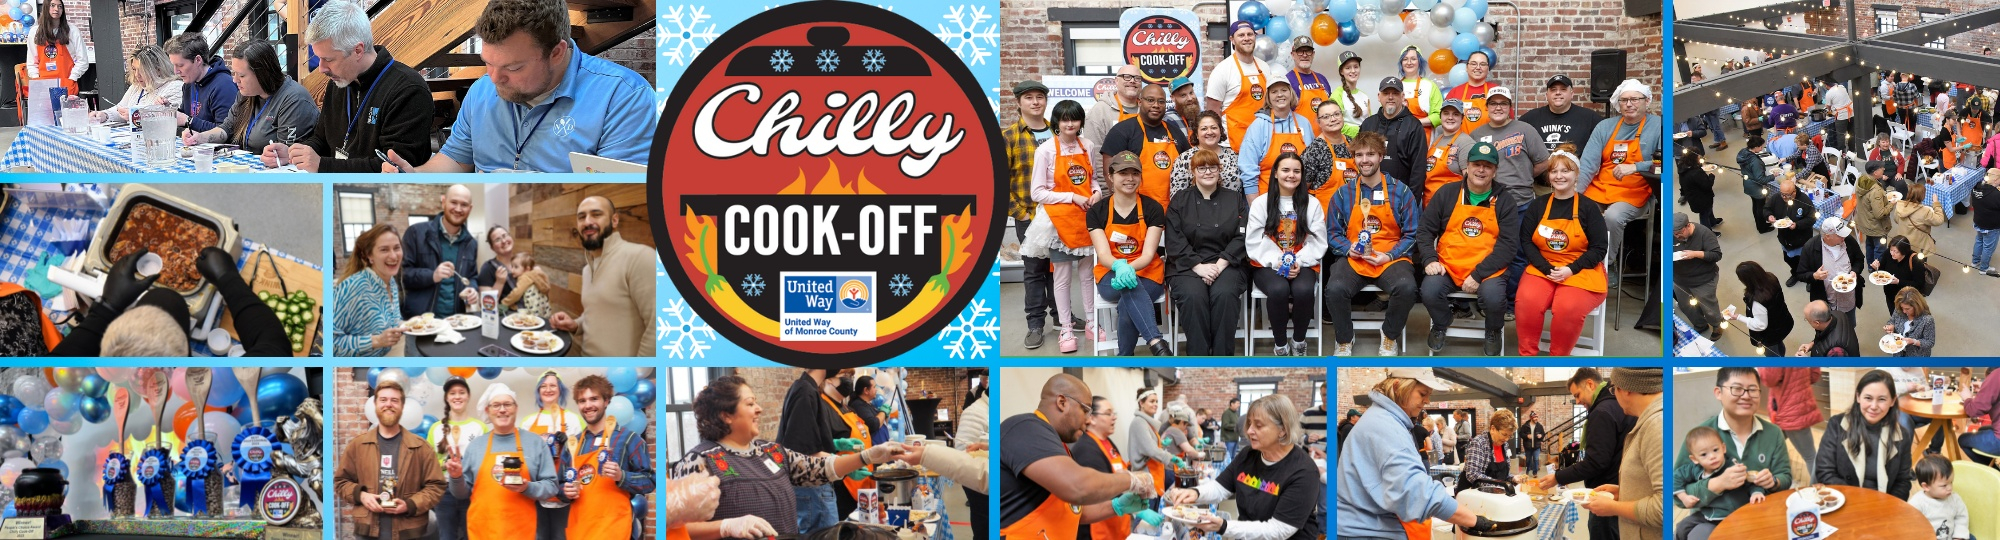 Chilly Cook-Off